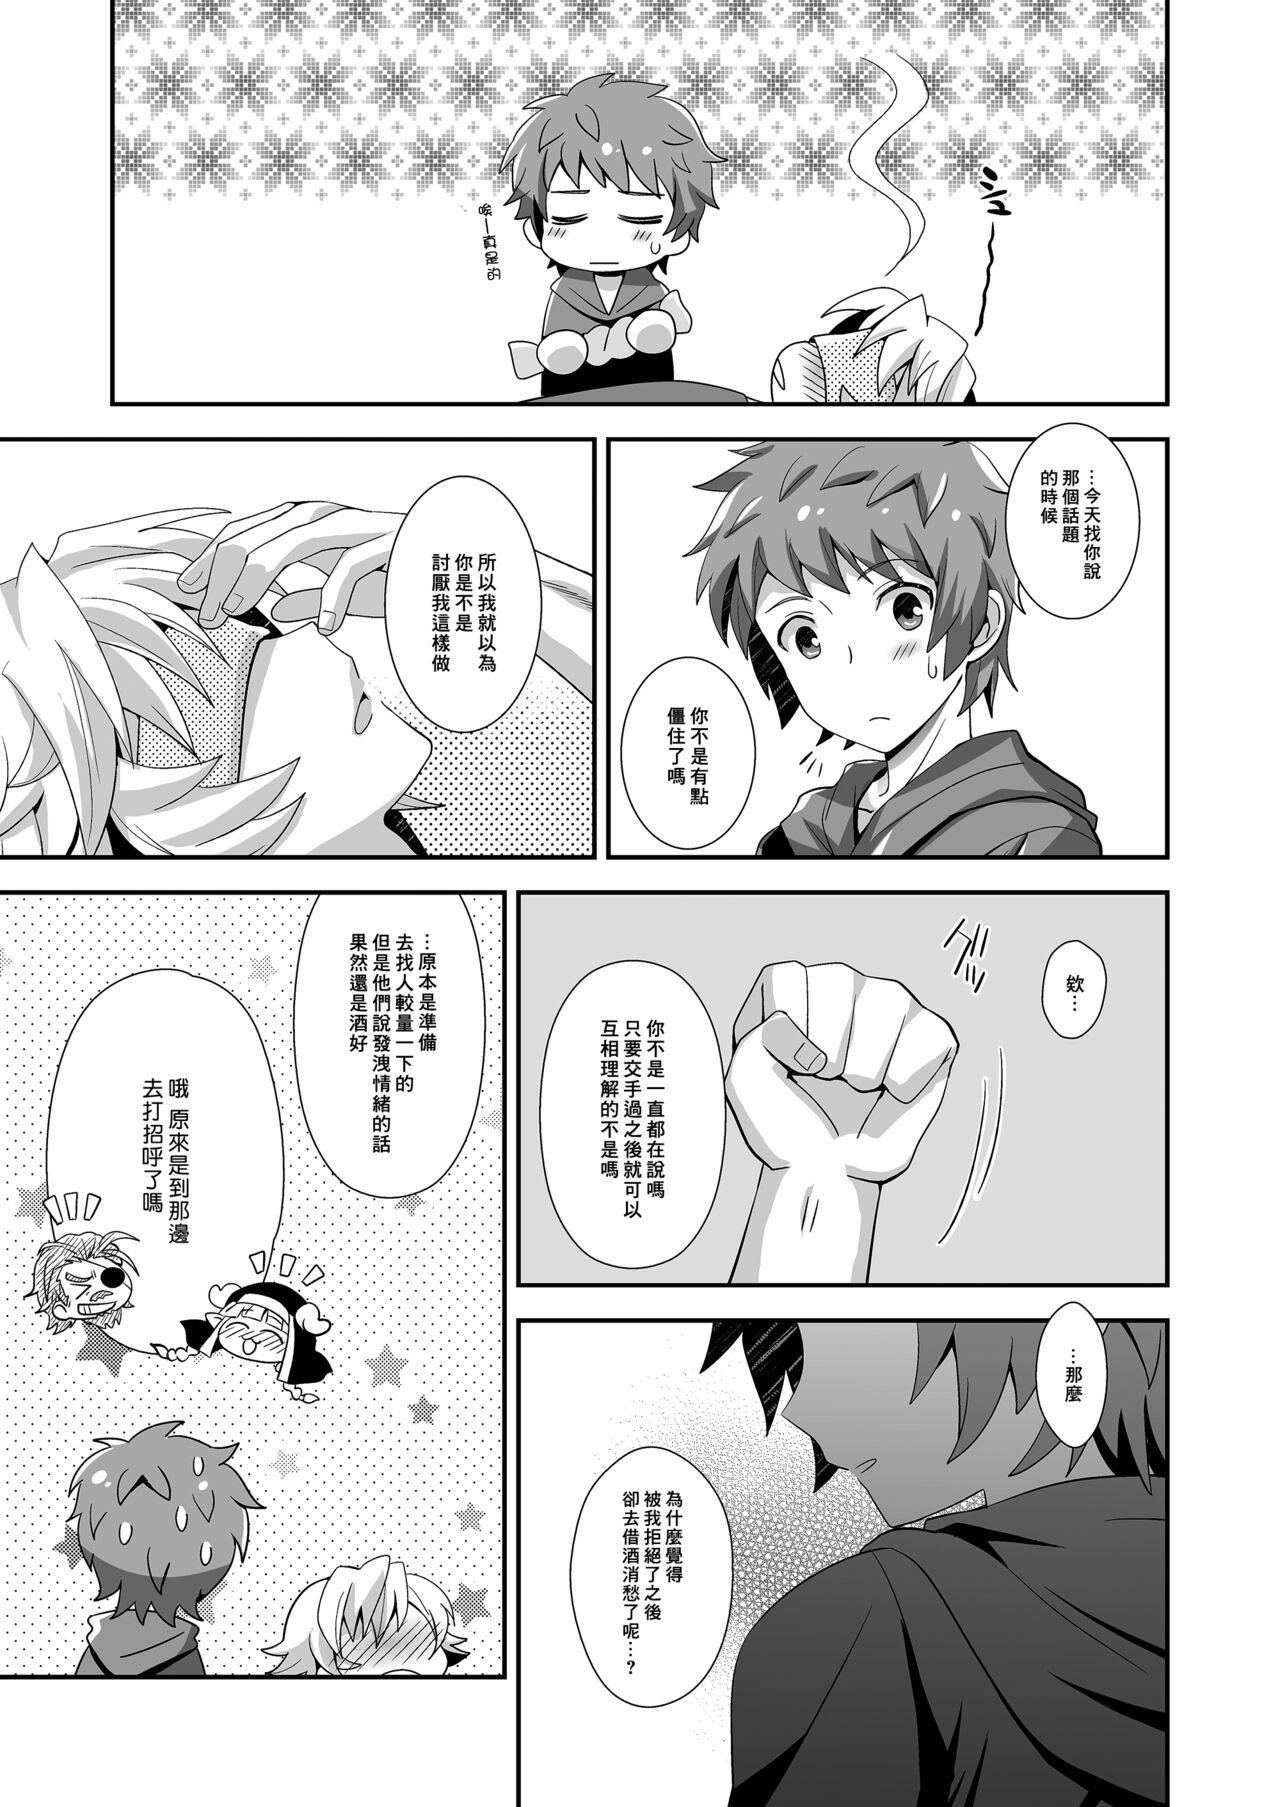 Gostoso Hibike! Blast Knuckle!! - Granblue fantasy Roughsex - Page 10